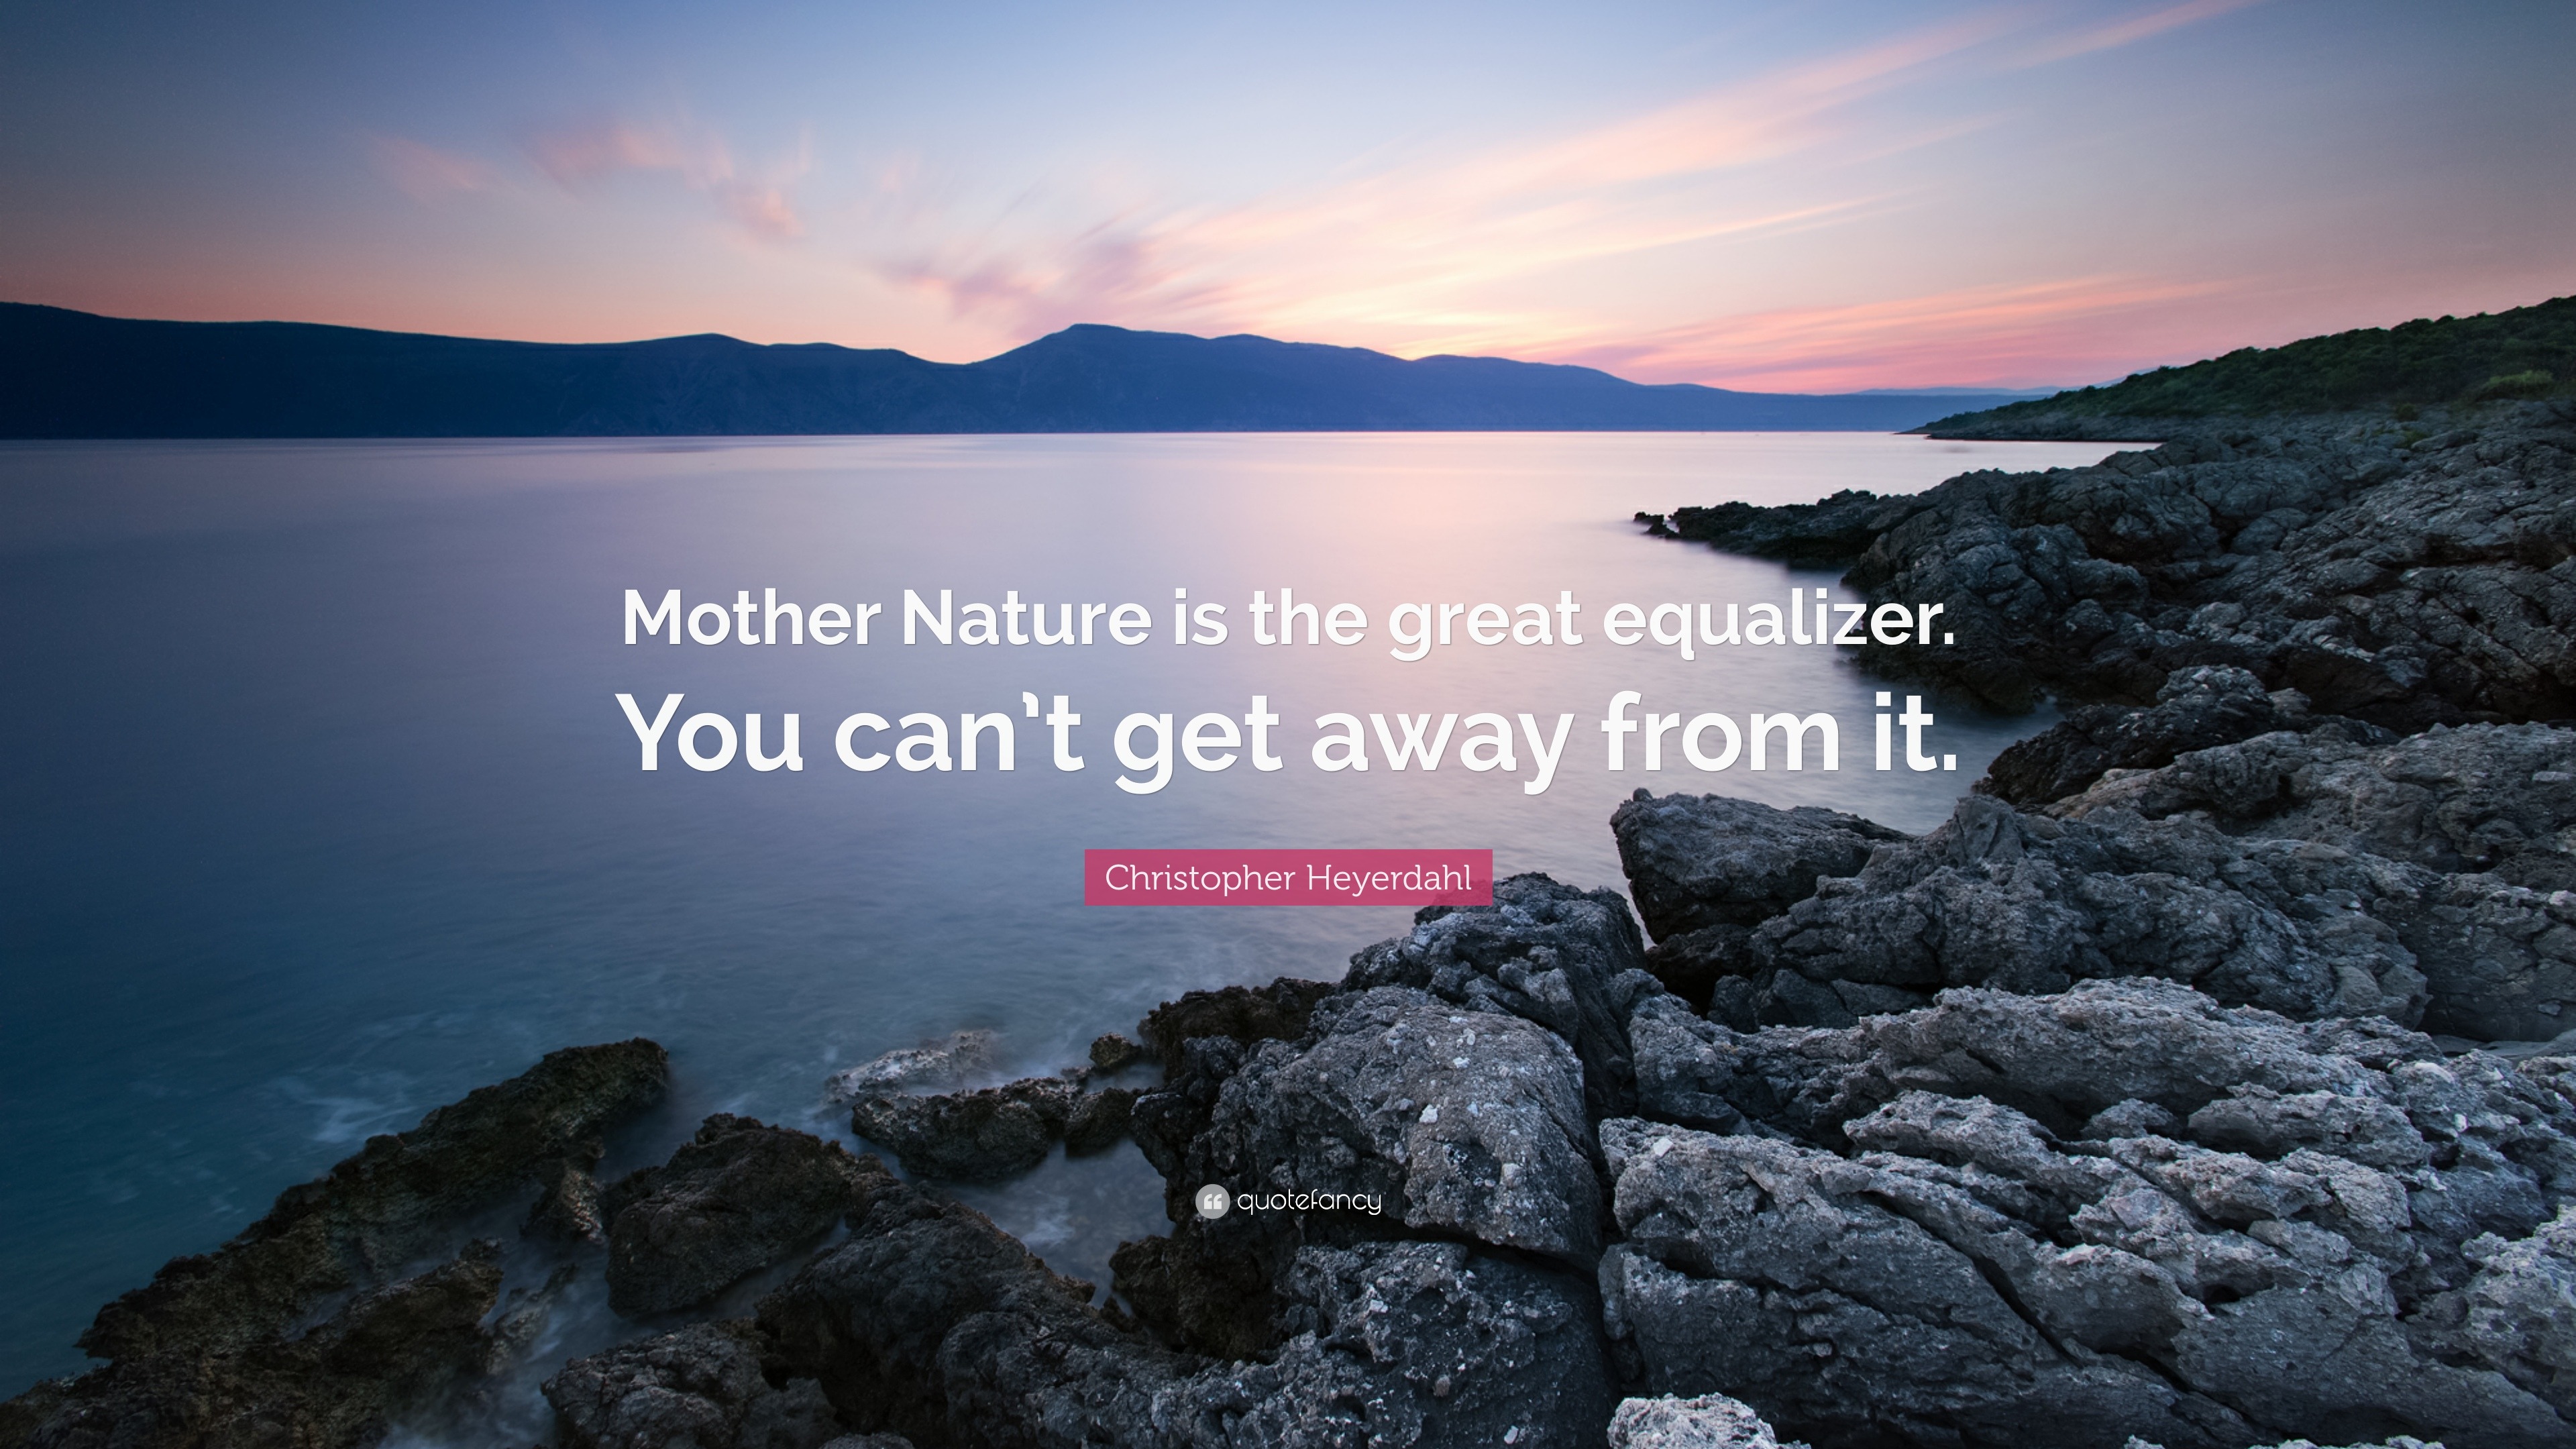 Christopher Heyerdahl Quote: “Mother Nature is the great ...